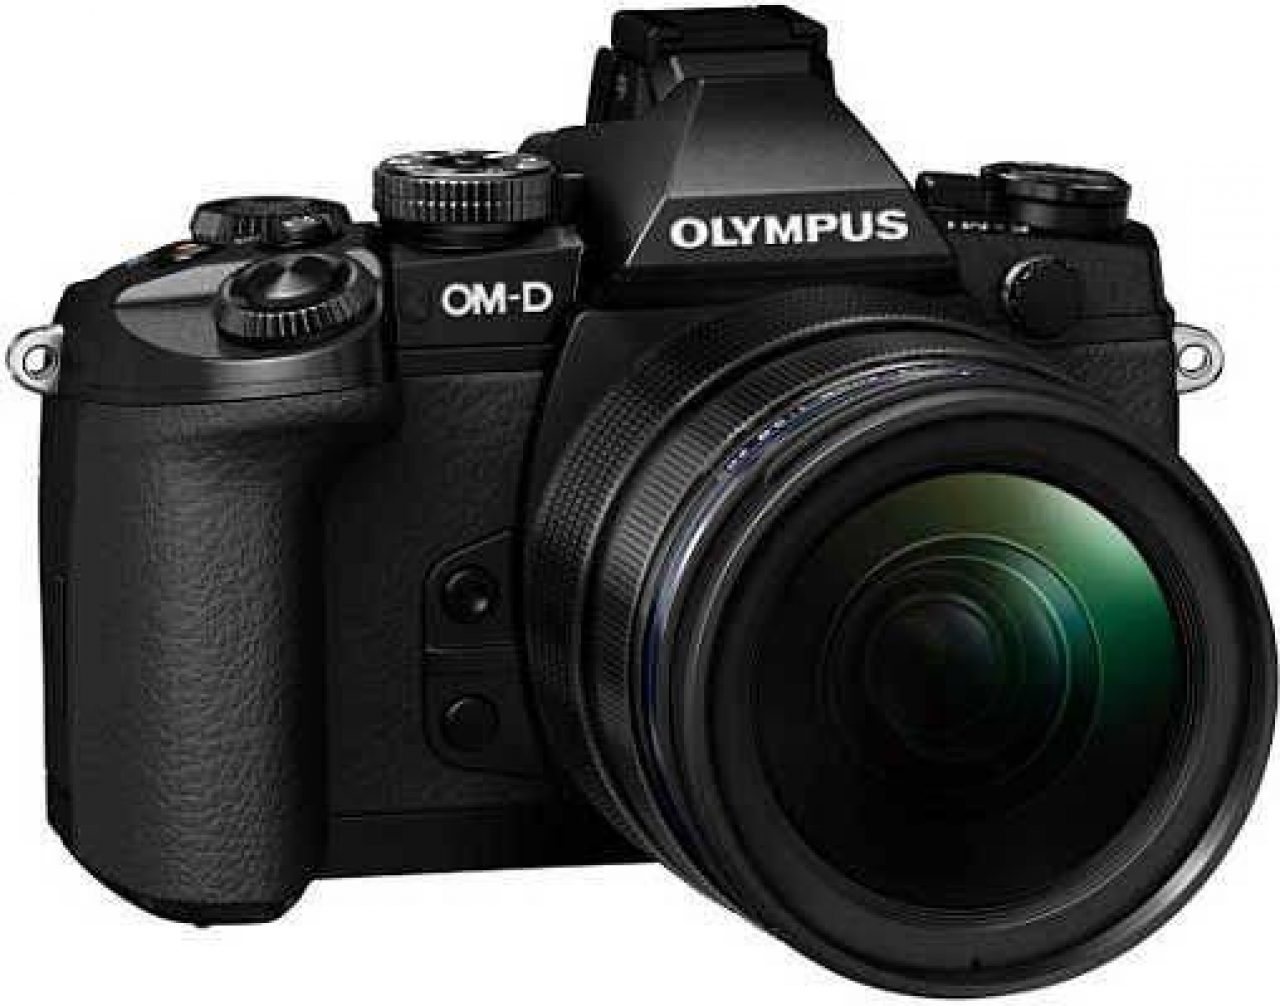 Olympus OM-D E-M1 Review | Photography Blog